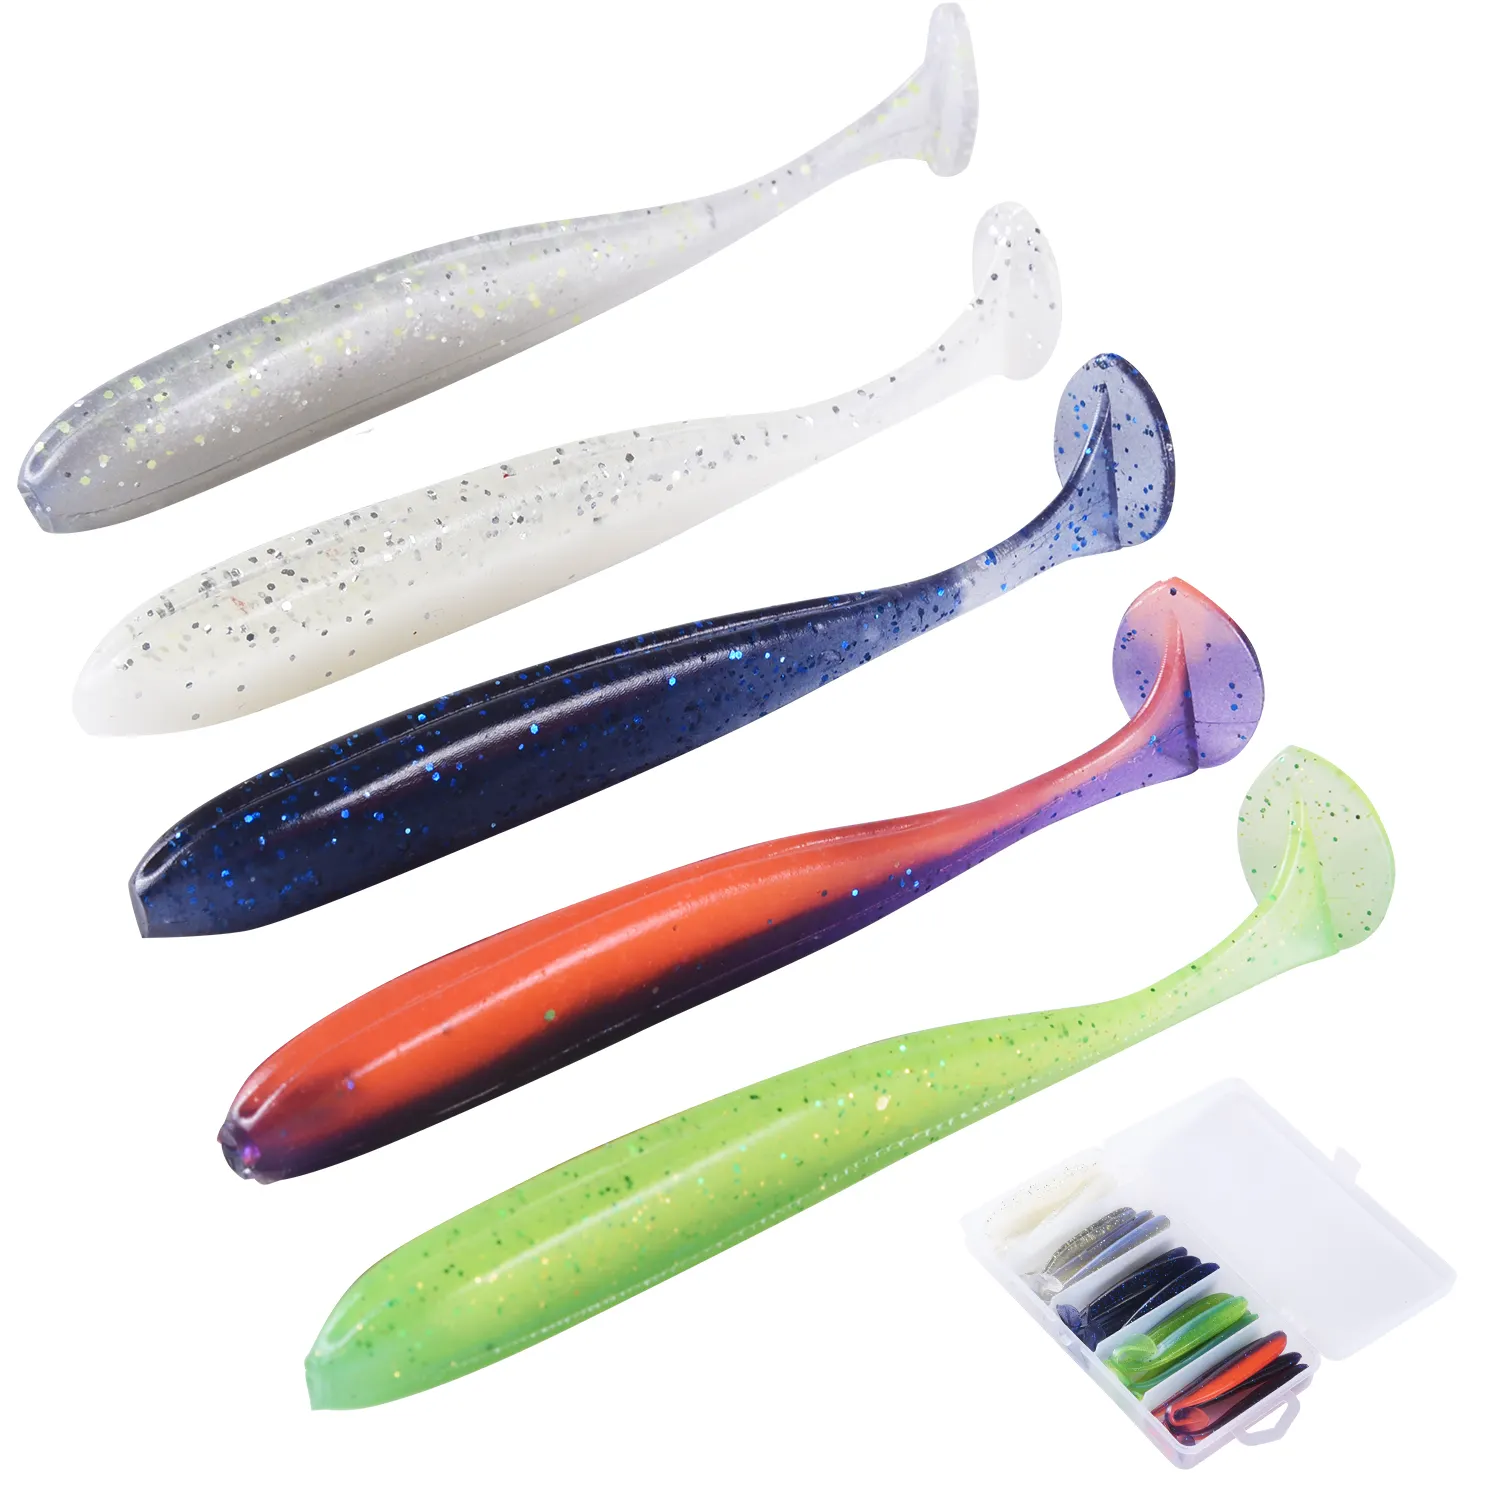 TOPIND High Quality Plastic Soft Bait Fishing Lure Artificial Lure Wholesale